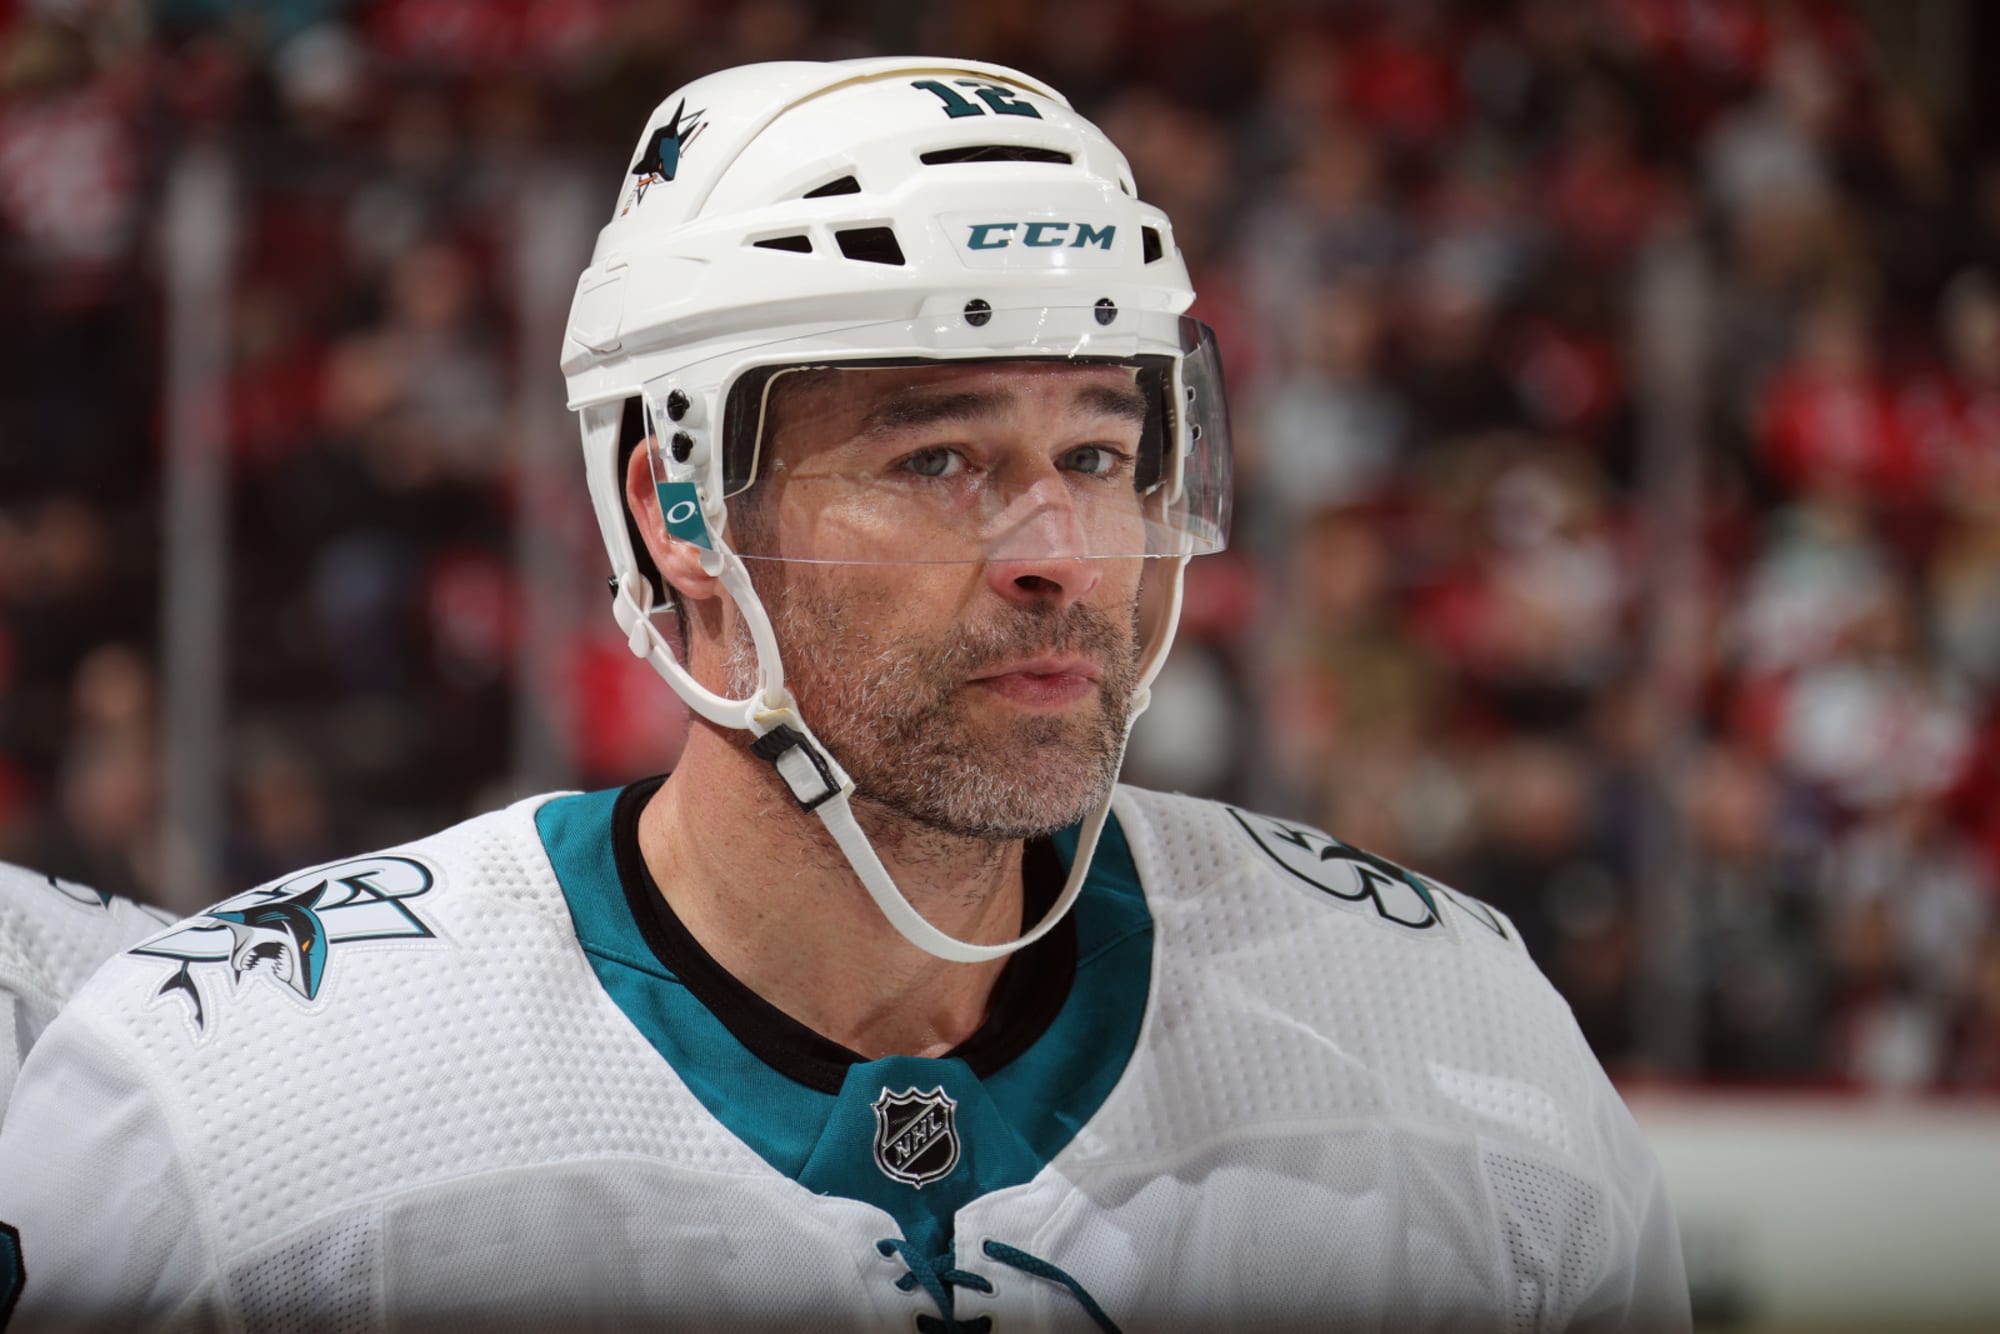 Patrick Marleau back in San Jose for third stint with the Sharks